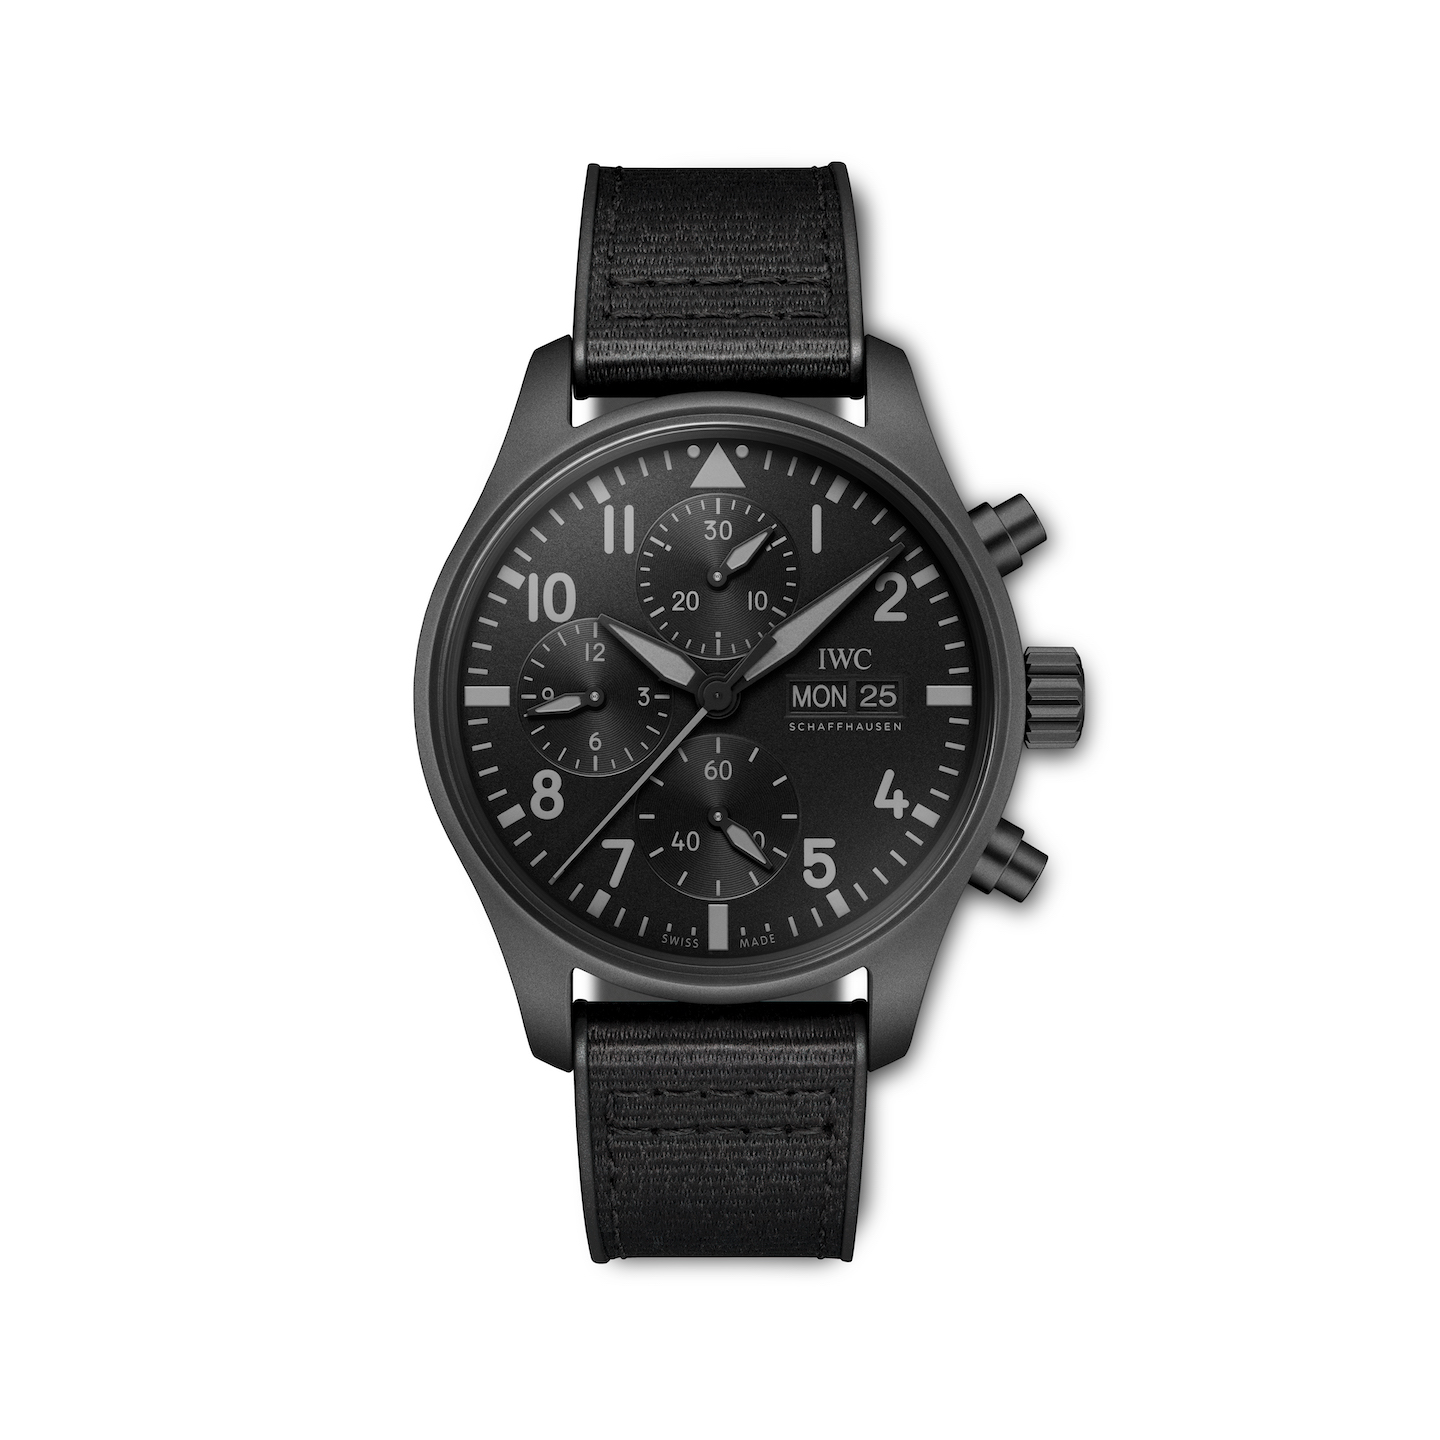 The IWC Pilot’s Watch Chronograph 41 Top Gun Ceratanium is the first 41mm full Ceratanium chronograph in this collection. 